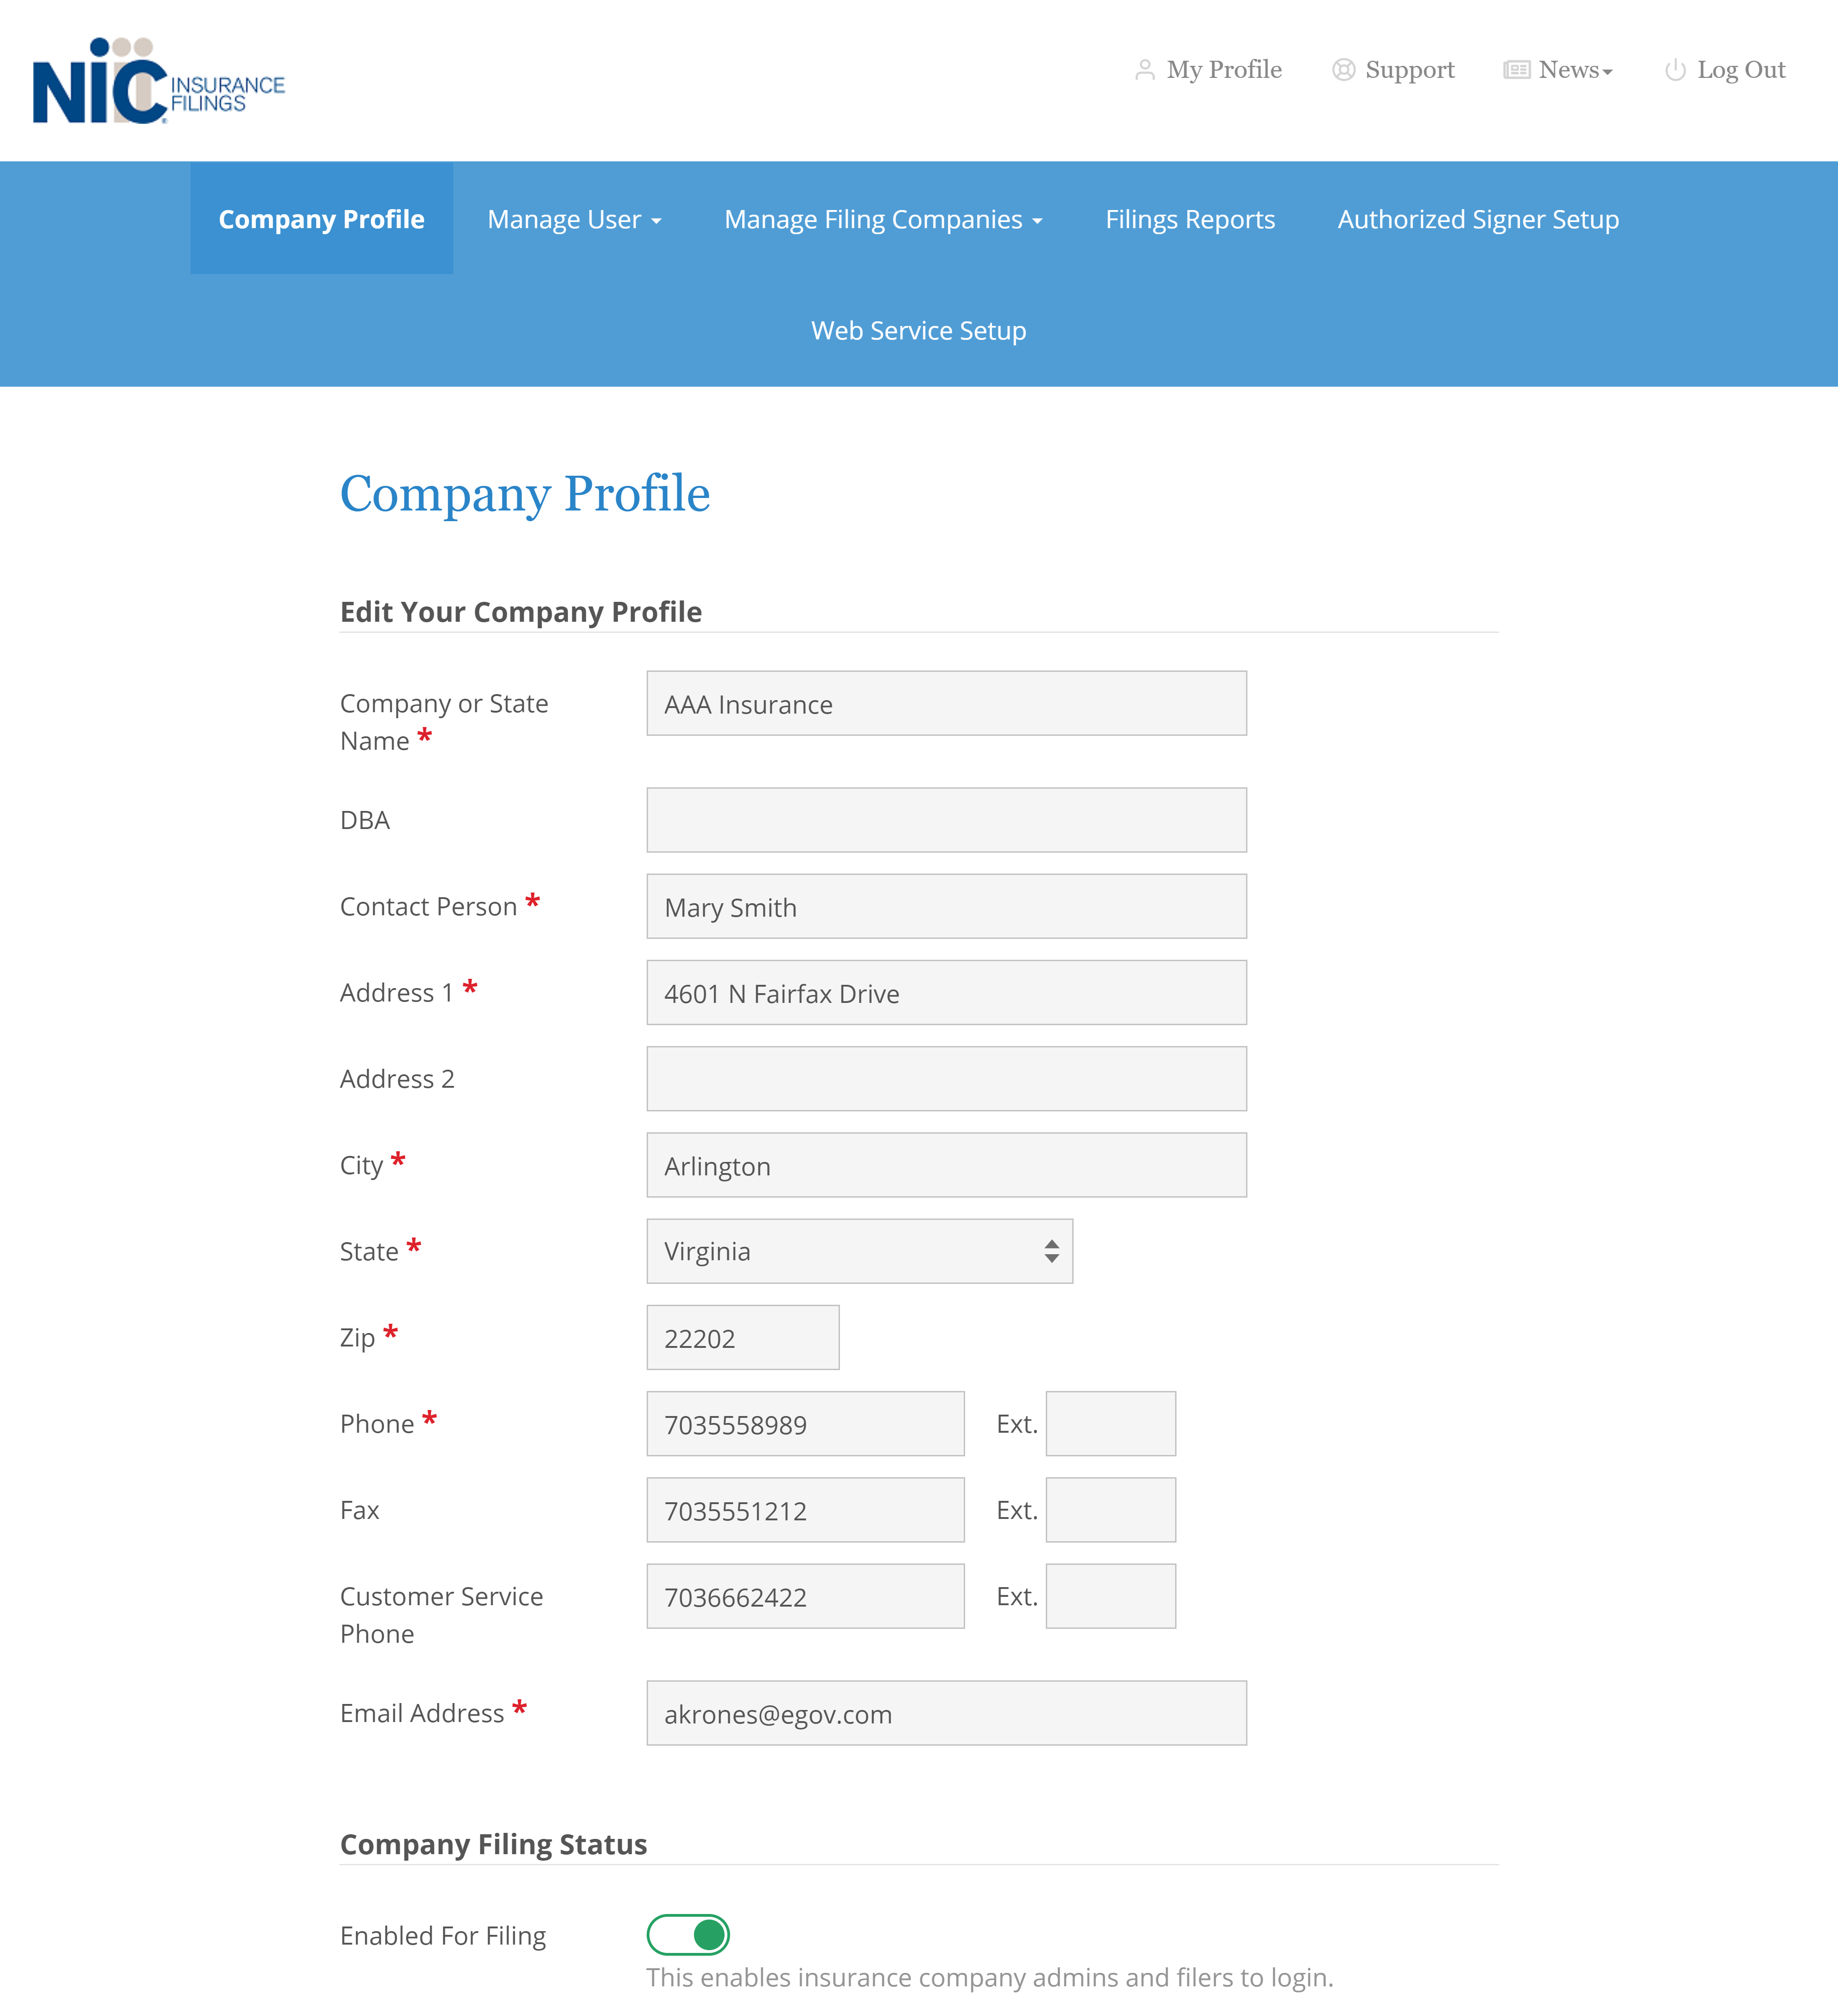 Screenshot of interface for Company Profile where users can edit profile information.